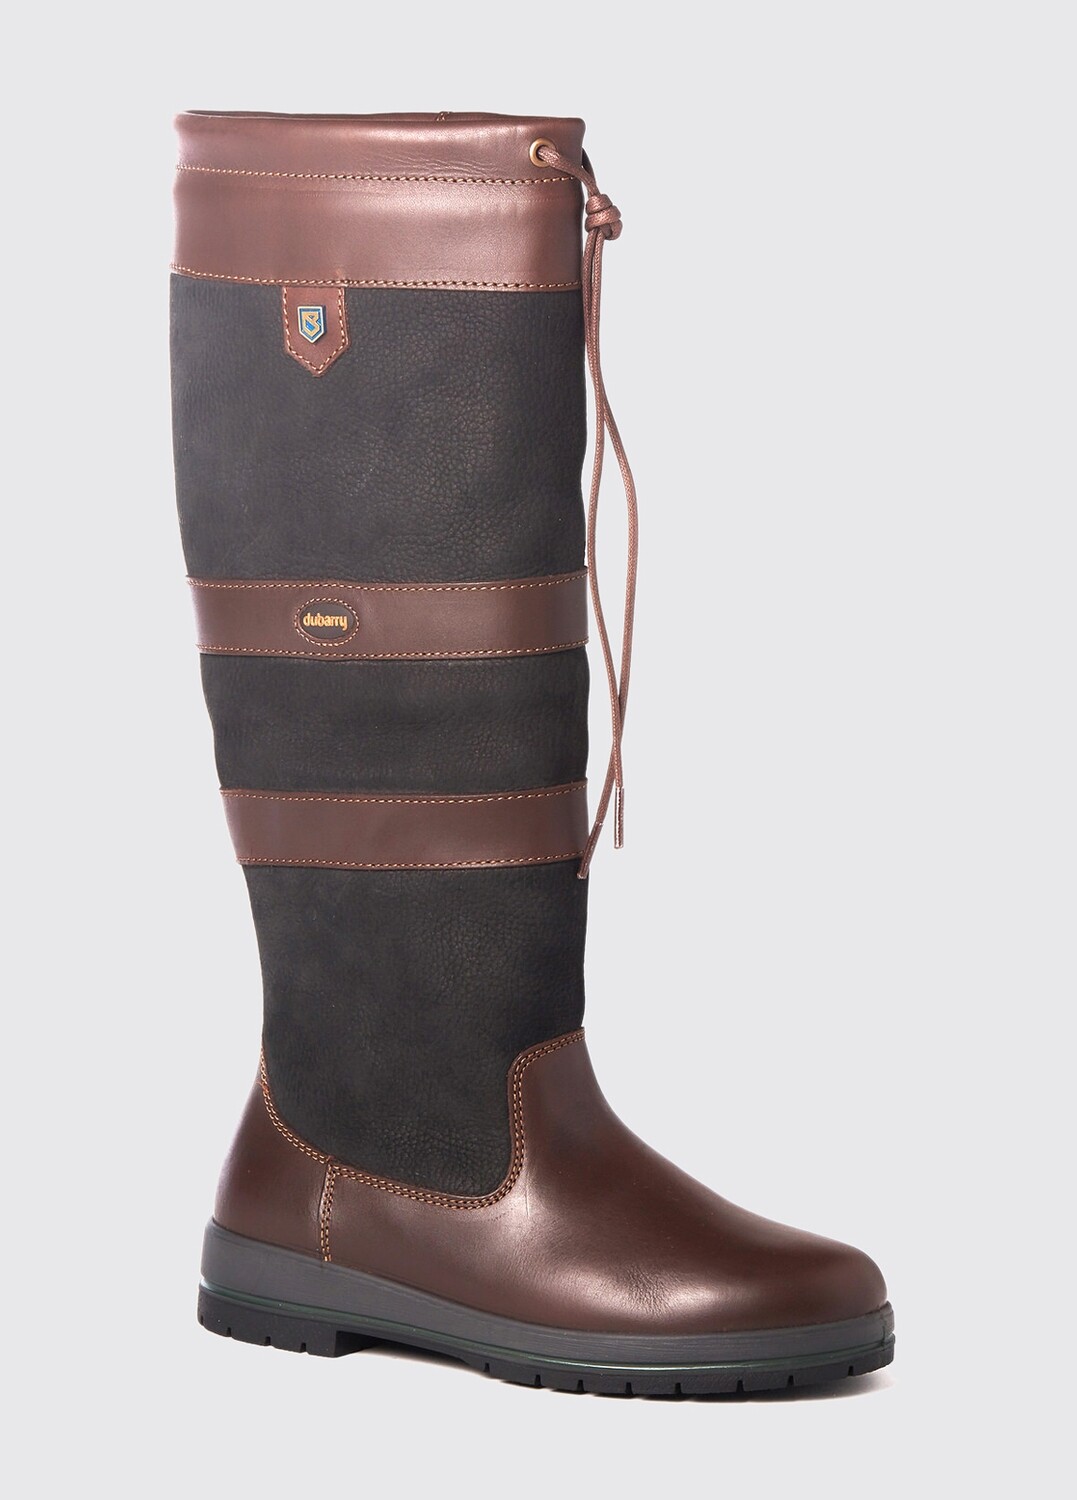 Dubarry Galway 3885